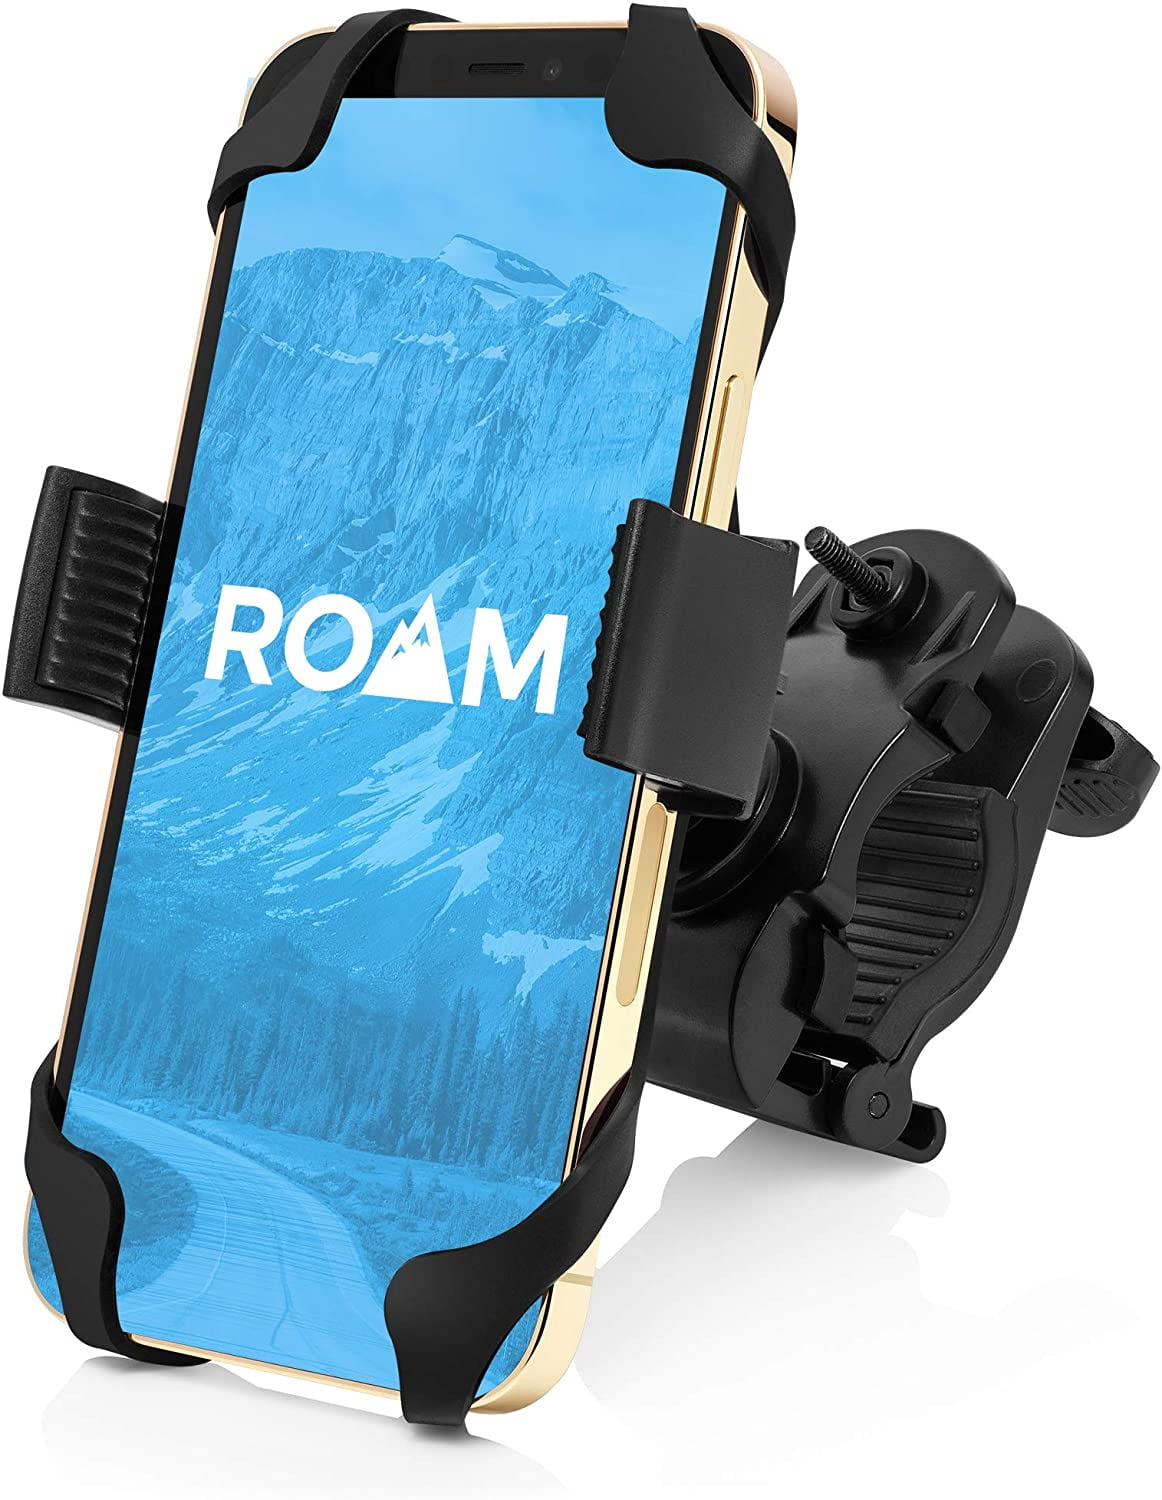 8 Plus 7 Plus Universal Premium Bike Phone Mount for Motorcycle Bike Handlebars Fits iPhone X XR 6s Plus Holds Phones Up to 3.5 Wide iPhone 6s Galaxy 7 S8 8 S9 Adjustable S7 